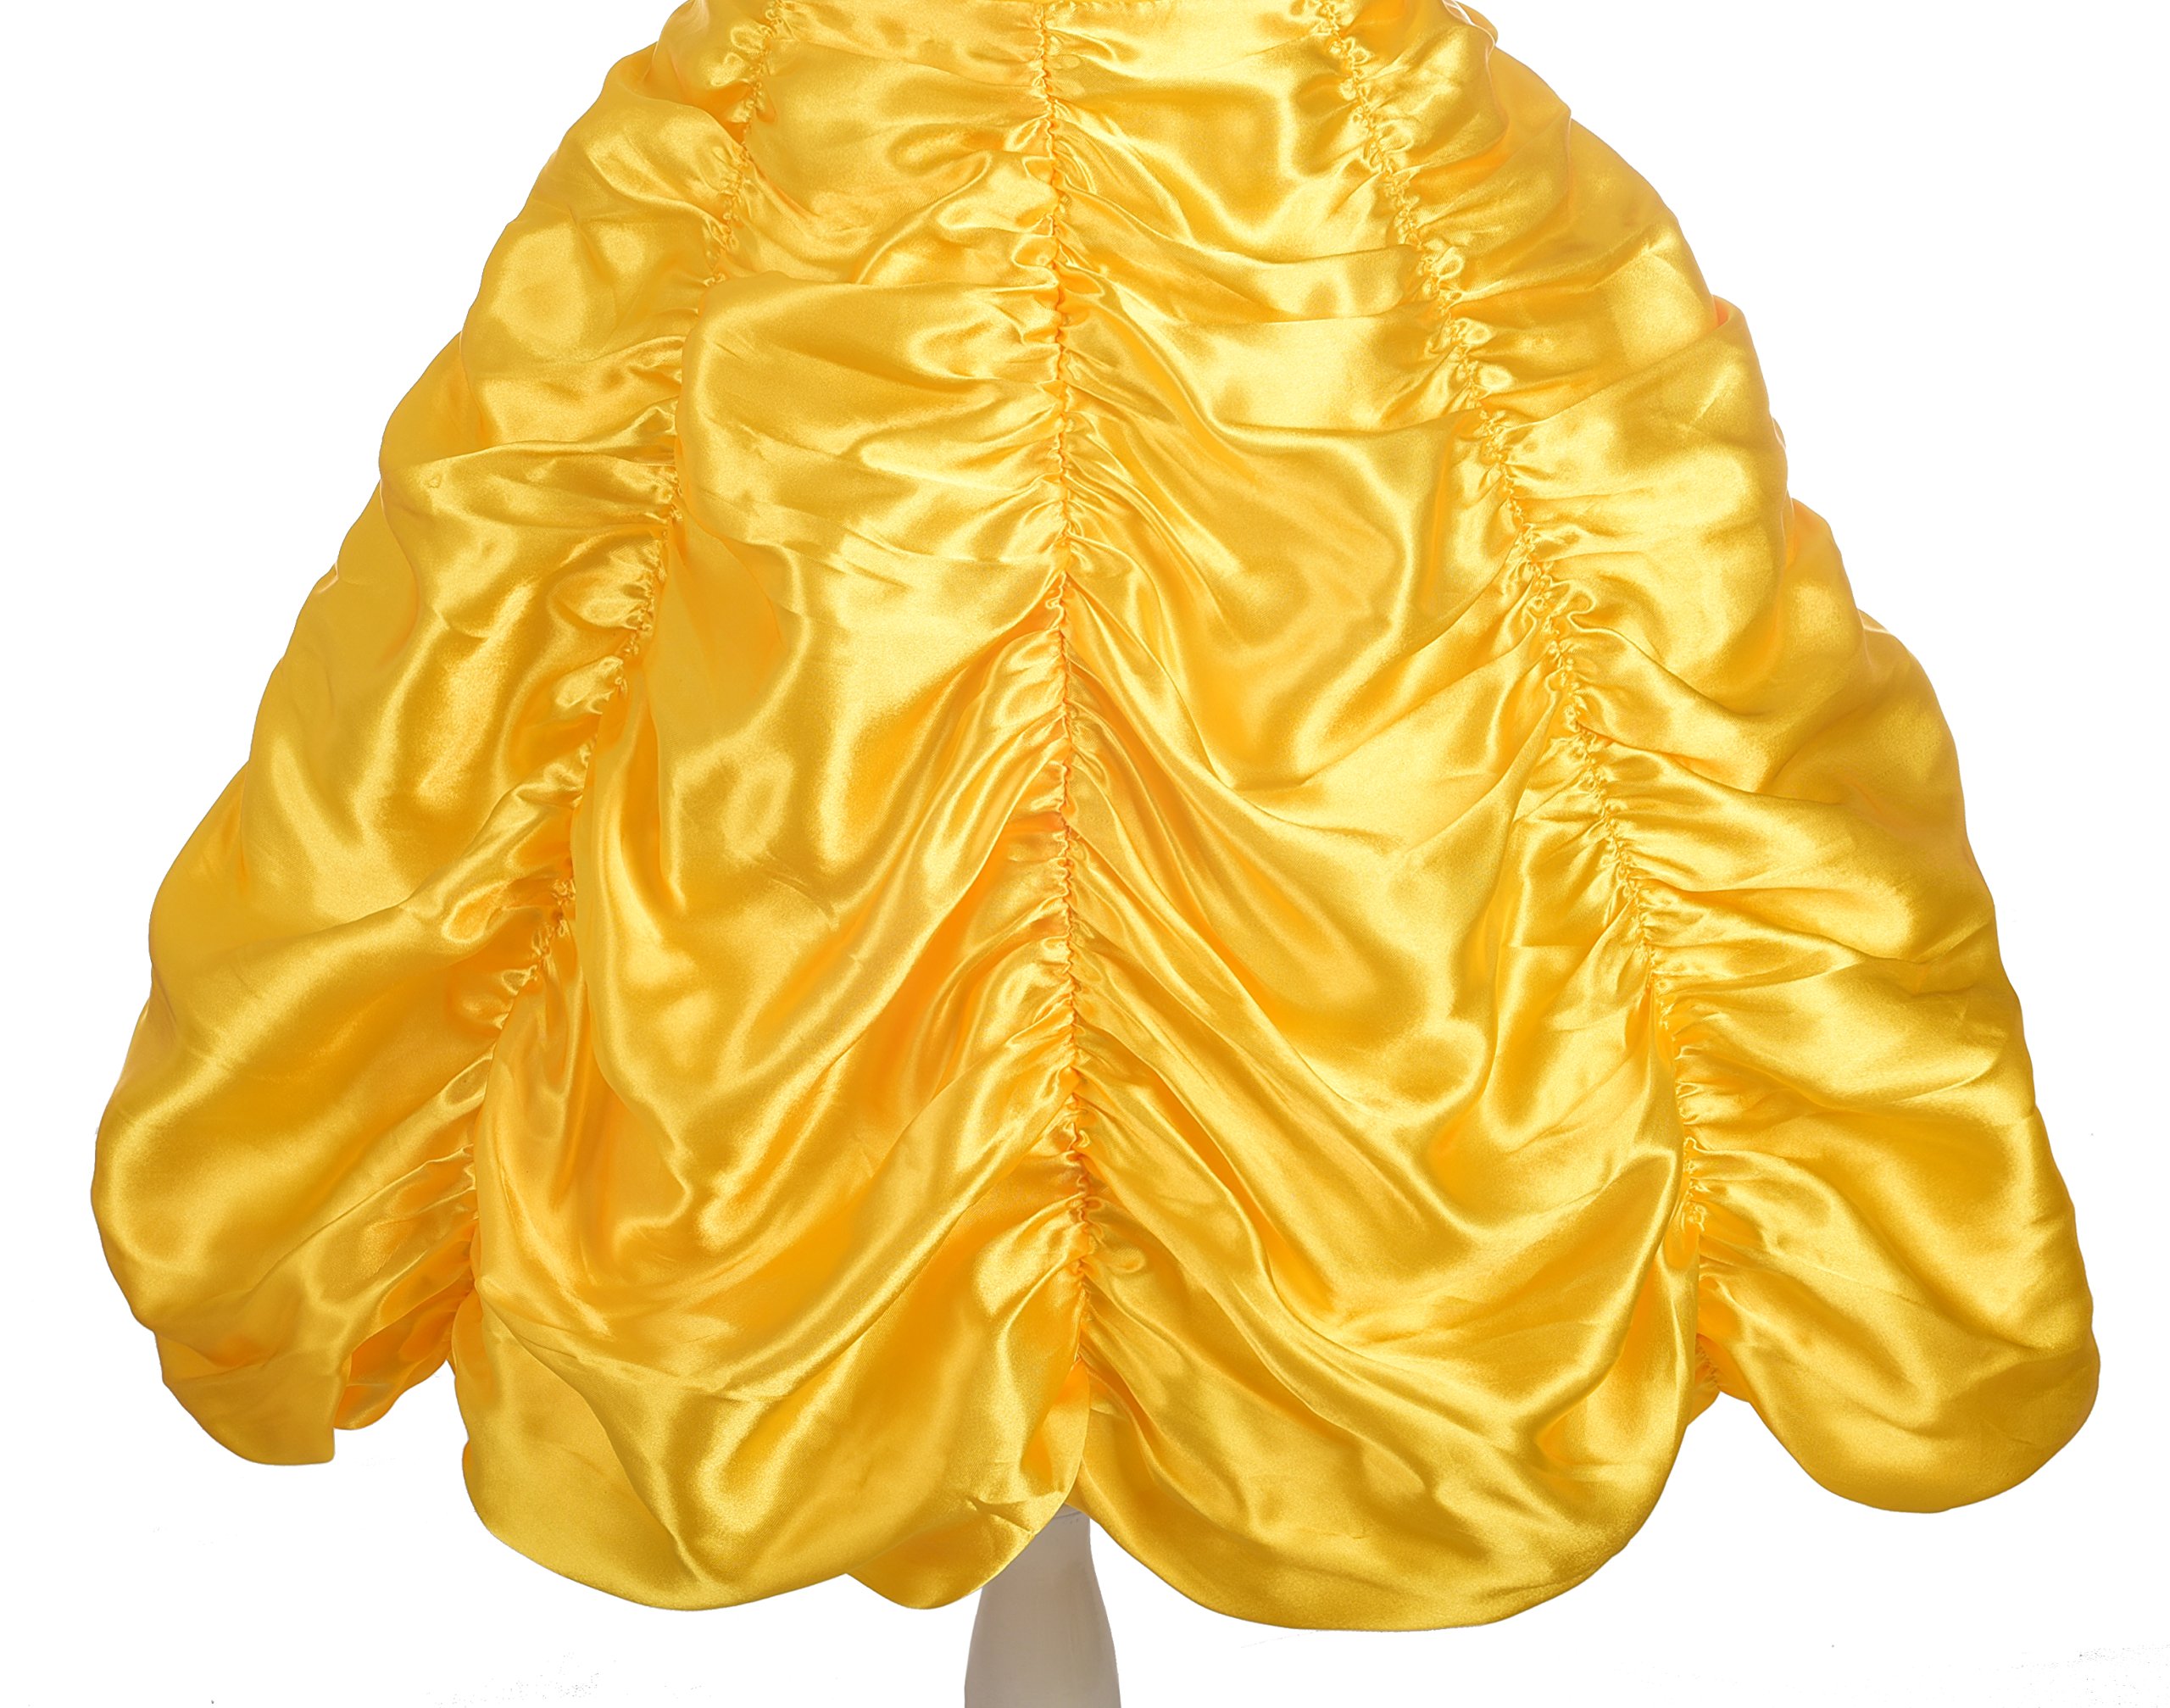 Dressy Daisy Girls' Princess Yellow Gold Ball Gown Birthday Party Fancy Dress Up Halloween Costume Size 18M-12